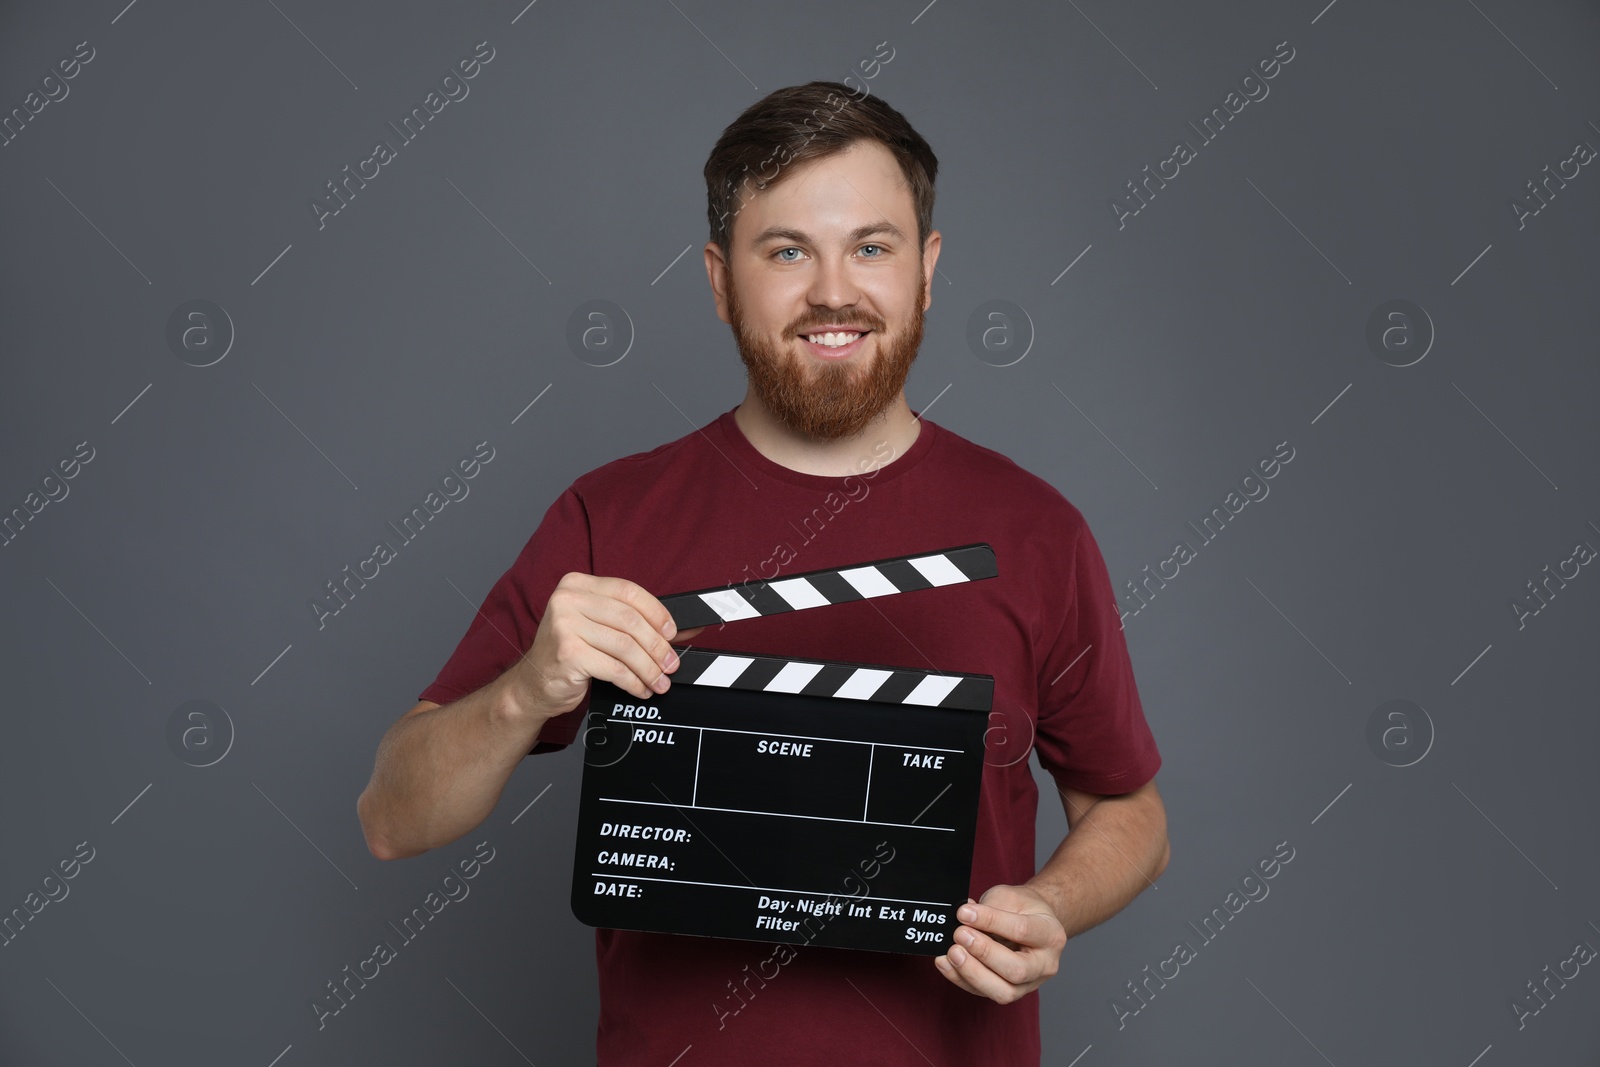 Photo of Making movie. Smiling man with clapperboard on grey background